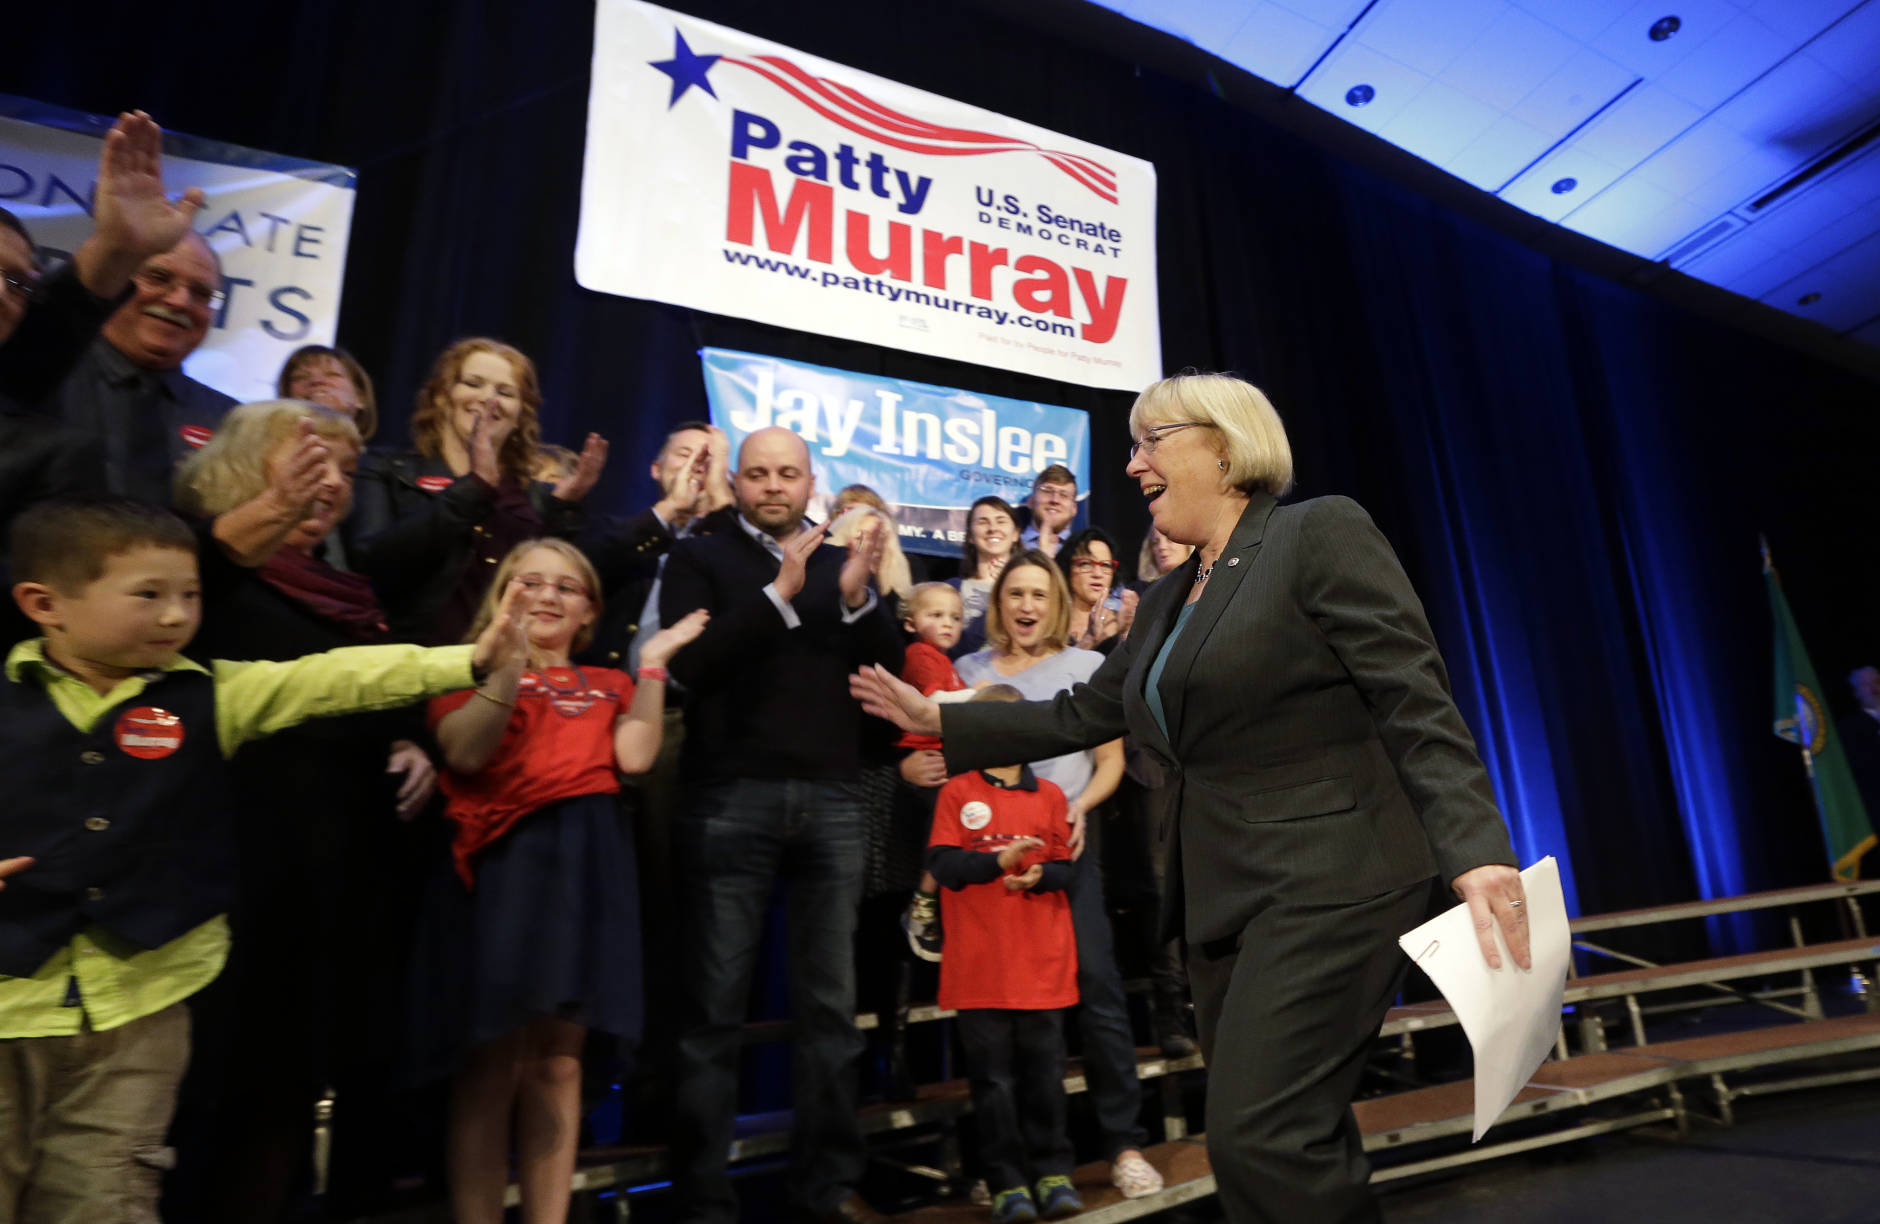 Sen. Patty Murray, D-Wash., right, greets family members as she takes the stage at an election night party for Democrats Tuesday, Nov. 8, 2016, in Seattle. Murray was elected to her fifth term as she defeated Republican Chris Vance. (AP Photo/Elaine Thompson)